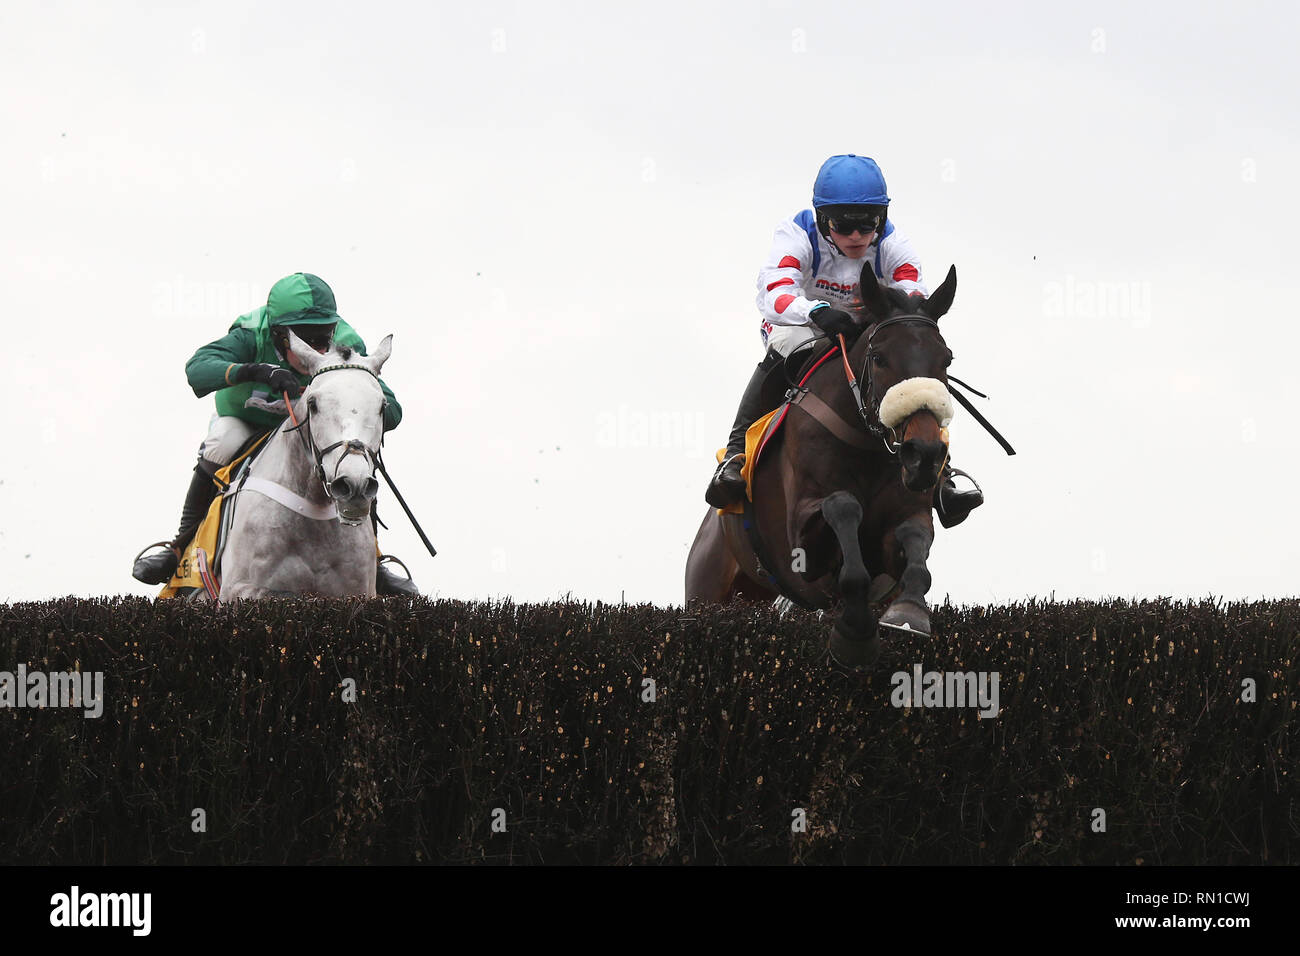 Clan Des Obeaux and Harry Cobden (right) lead Terrefort and Nico de Boinville over the last fence before winning The Betfair Denman Steeple Chase Race run at Ascot Racecourse. Stock Photo